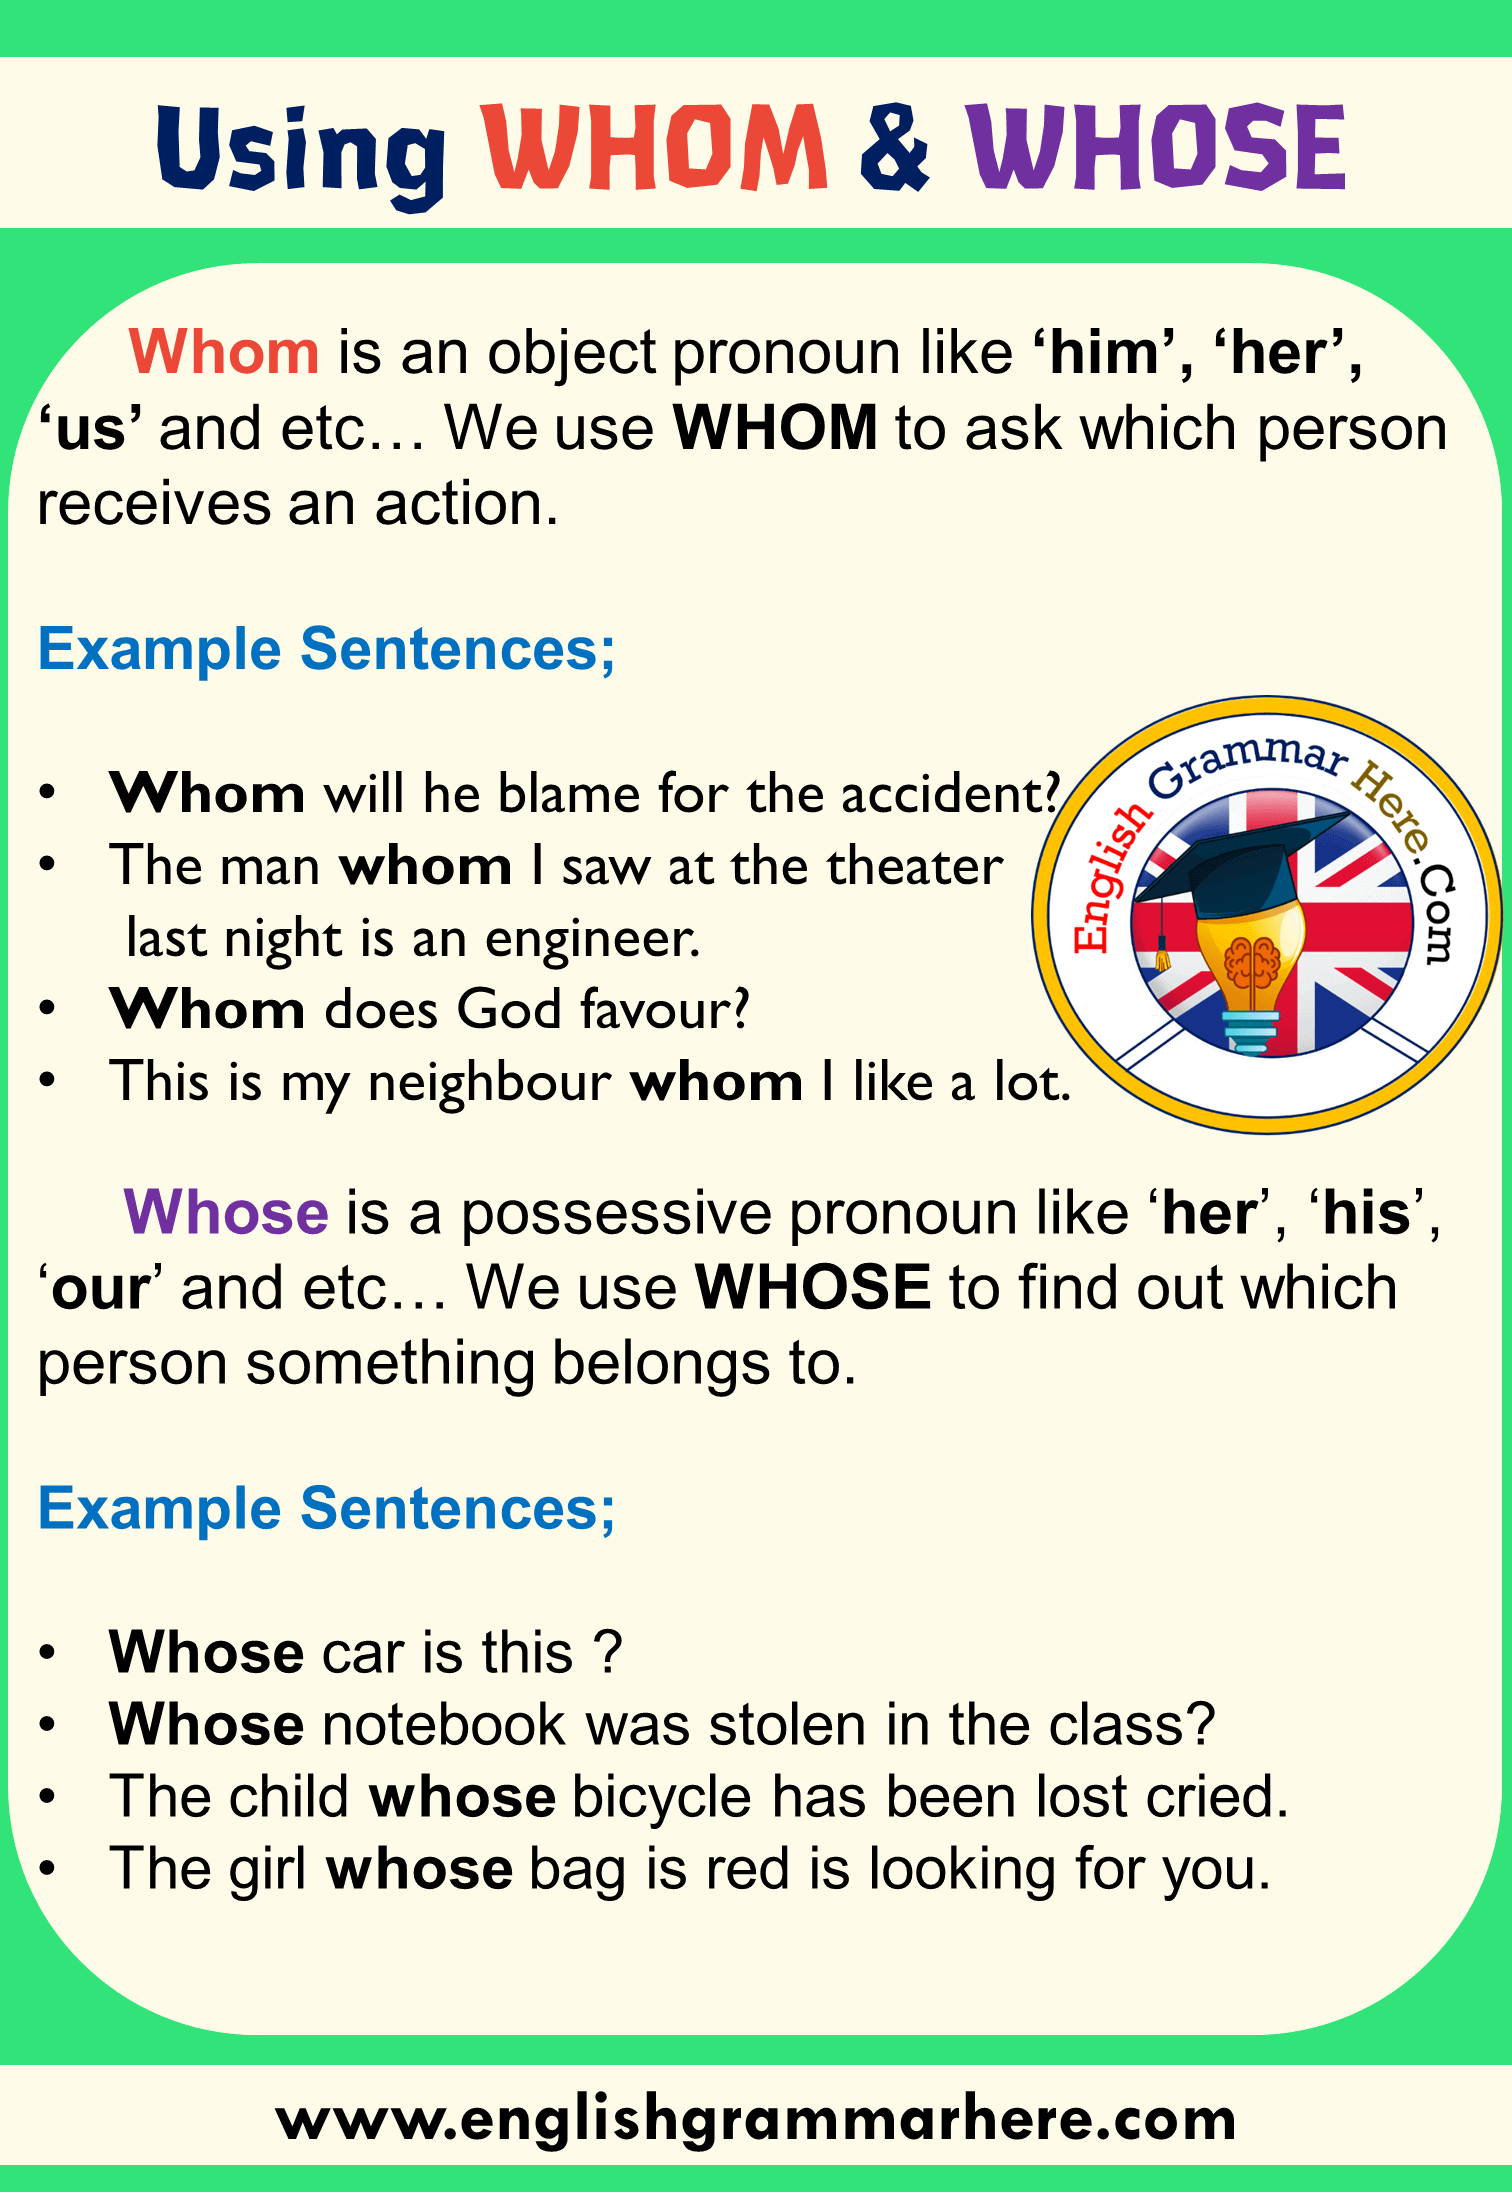 English Using WHOM and WHOSE, Example Sentences